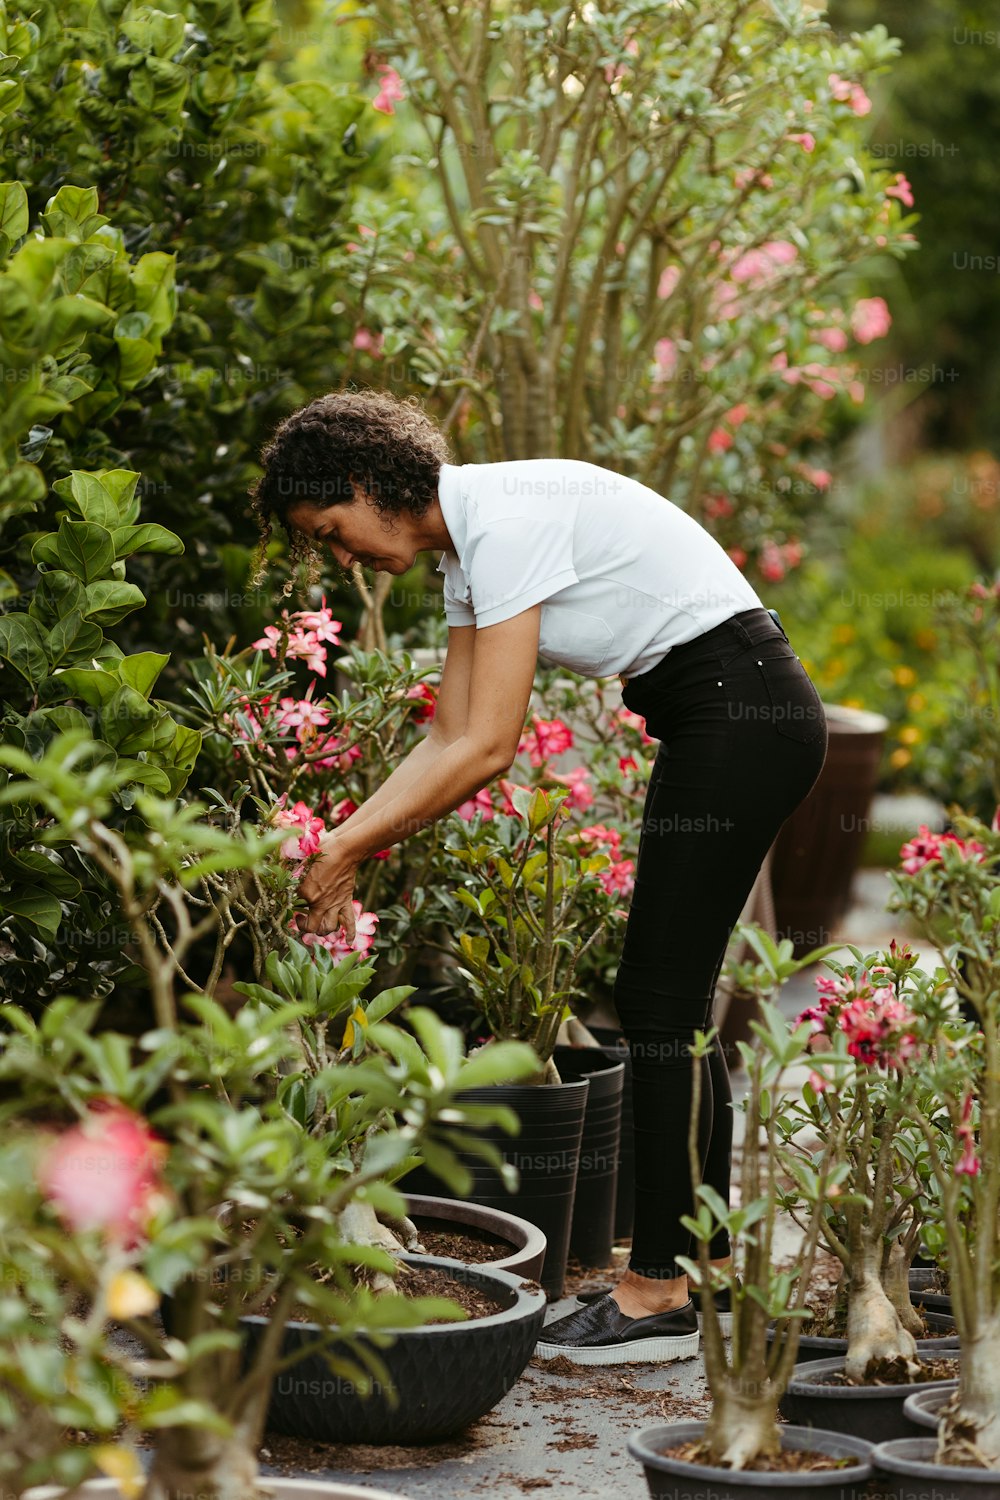 a woman in a white shirt and black pants tending to potted plants